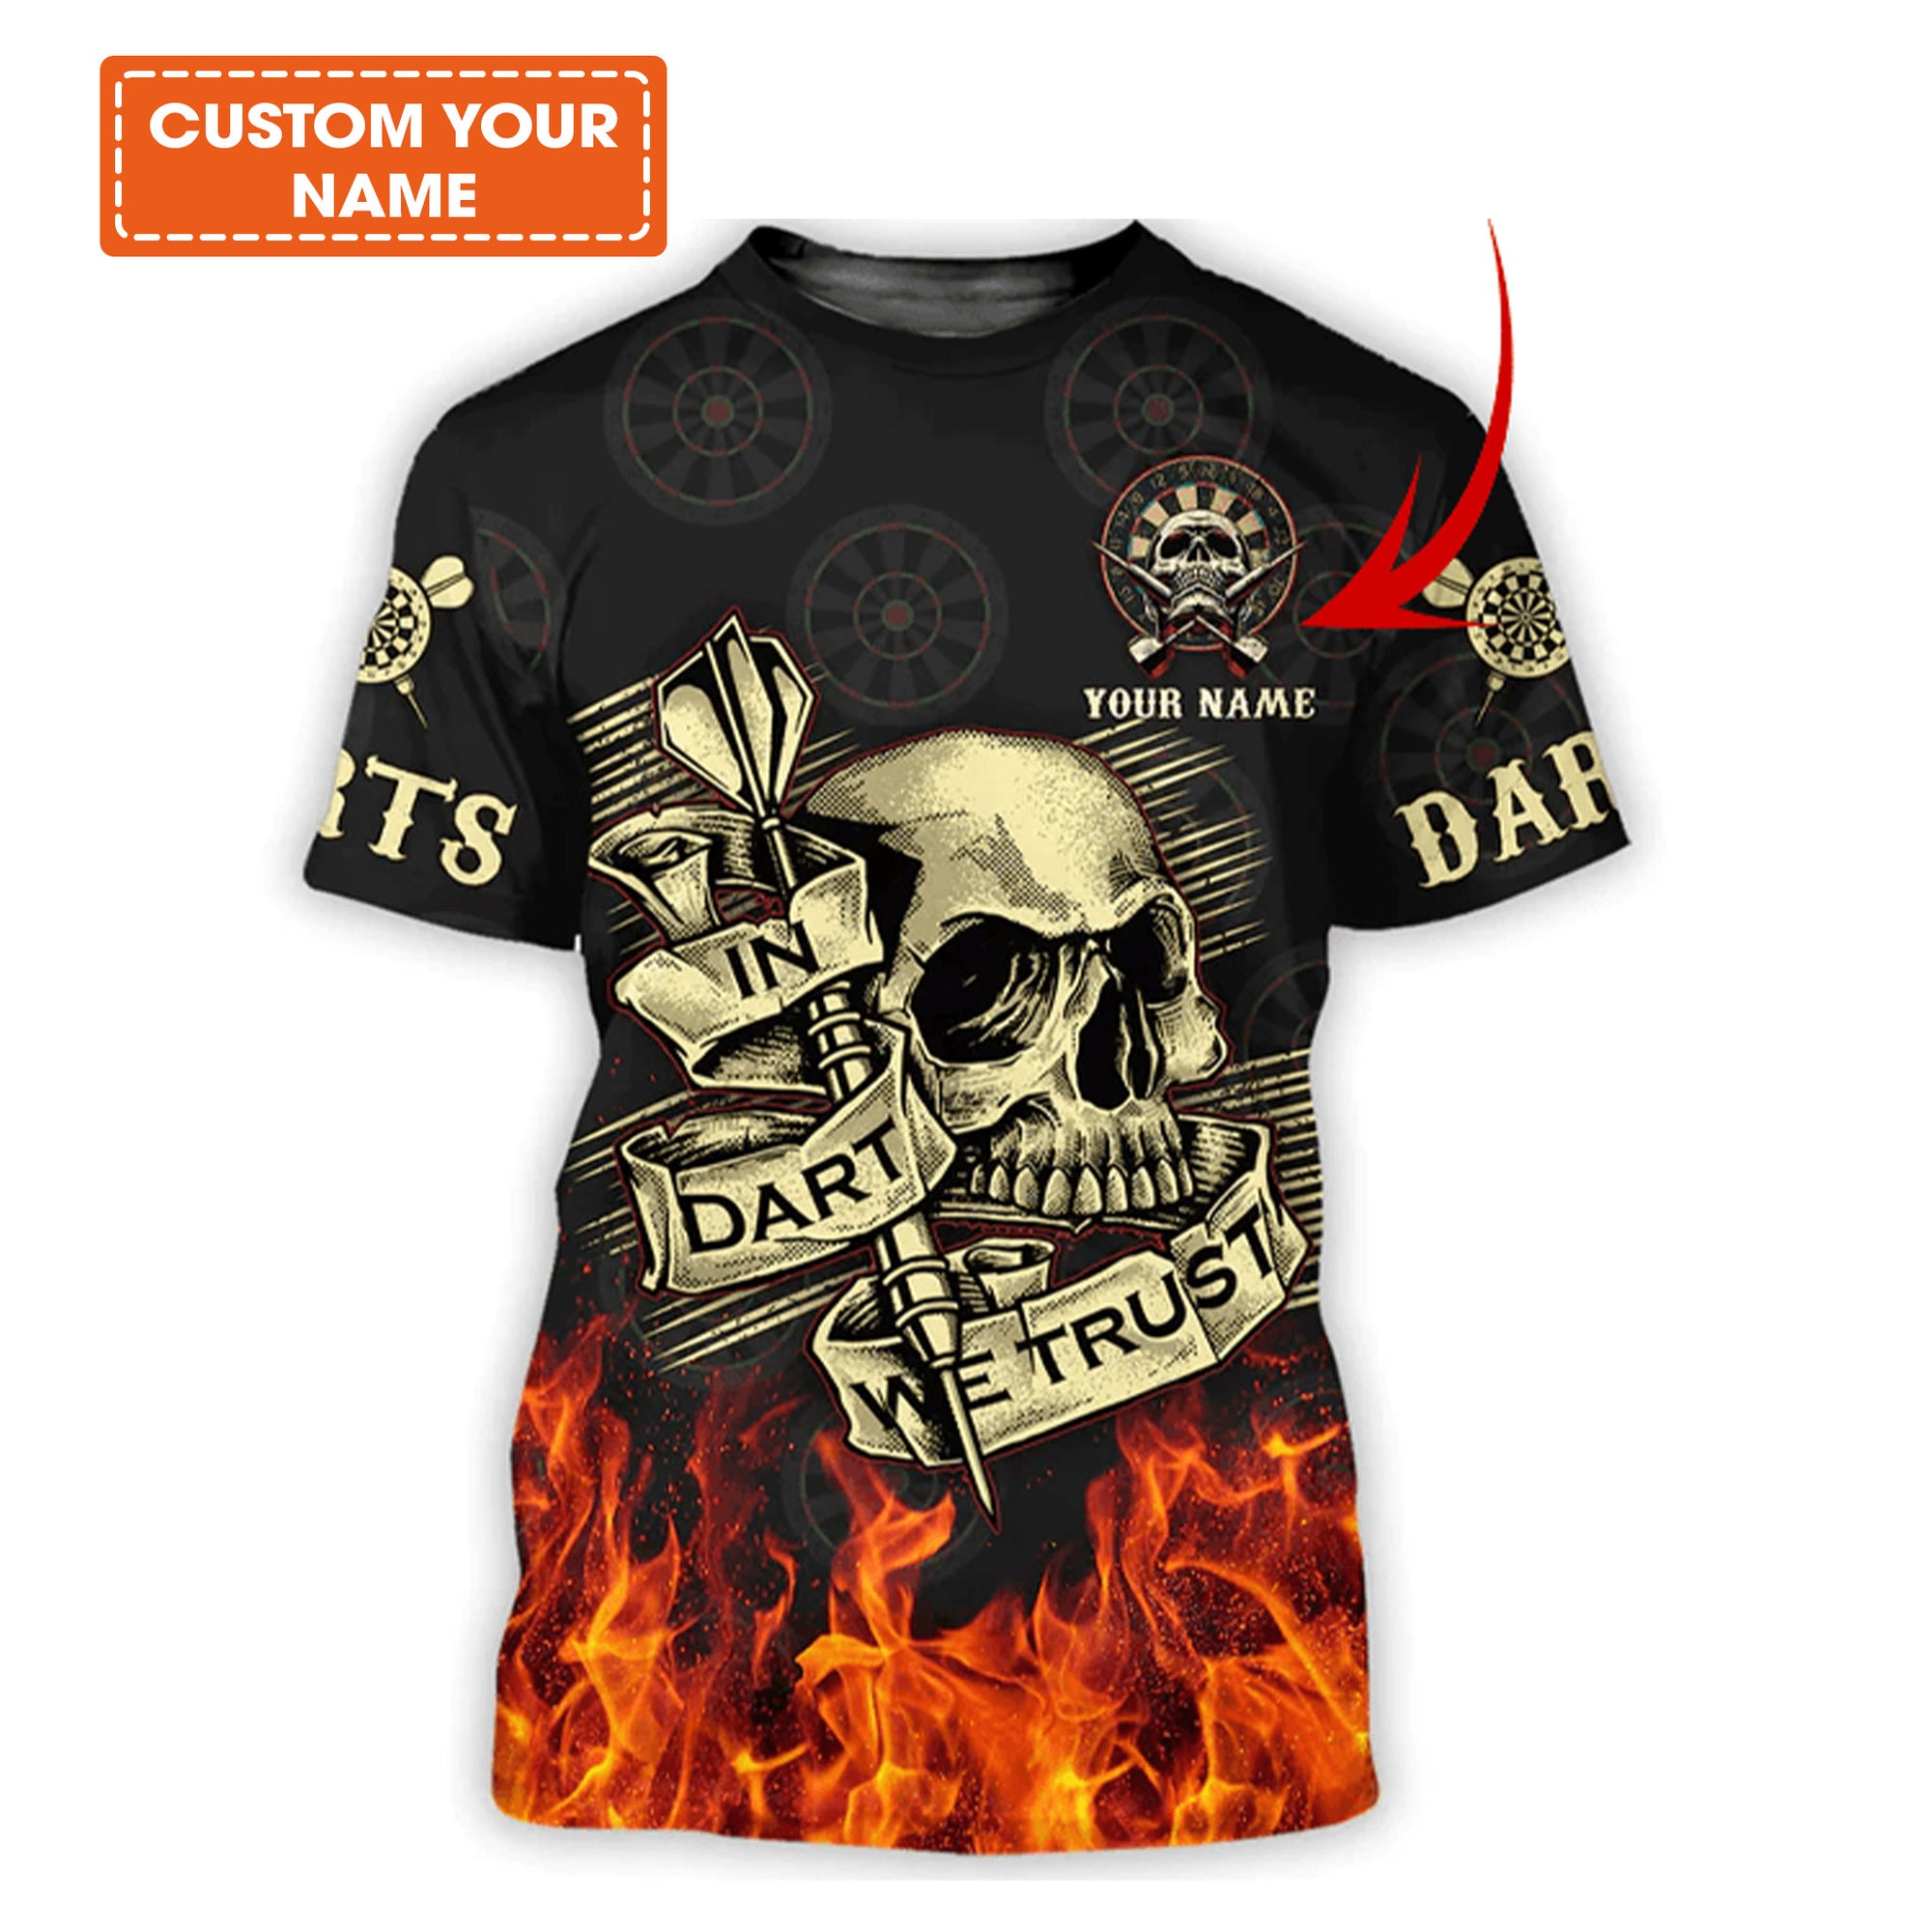 Customized Name Darts T Shirt, Darts Skull With Flame Personalized Name T Shirt For Men  - Perfect Gift For Darts Game Lovers, Darts Players